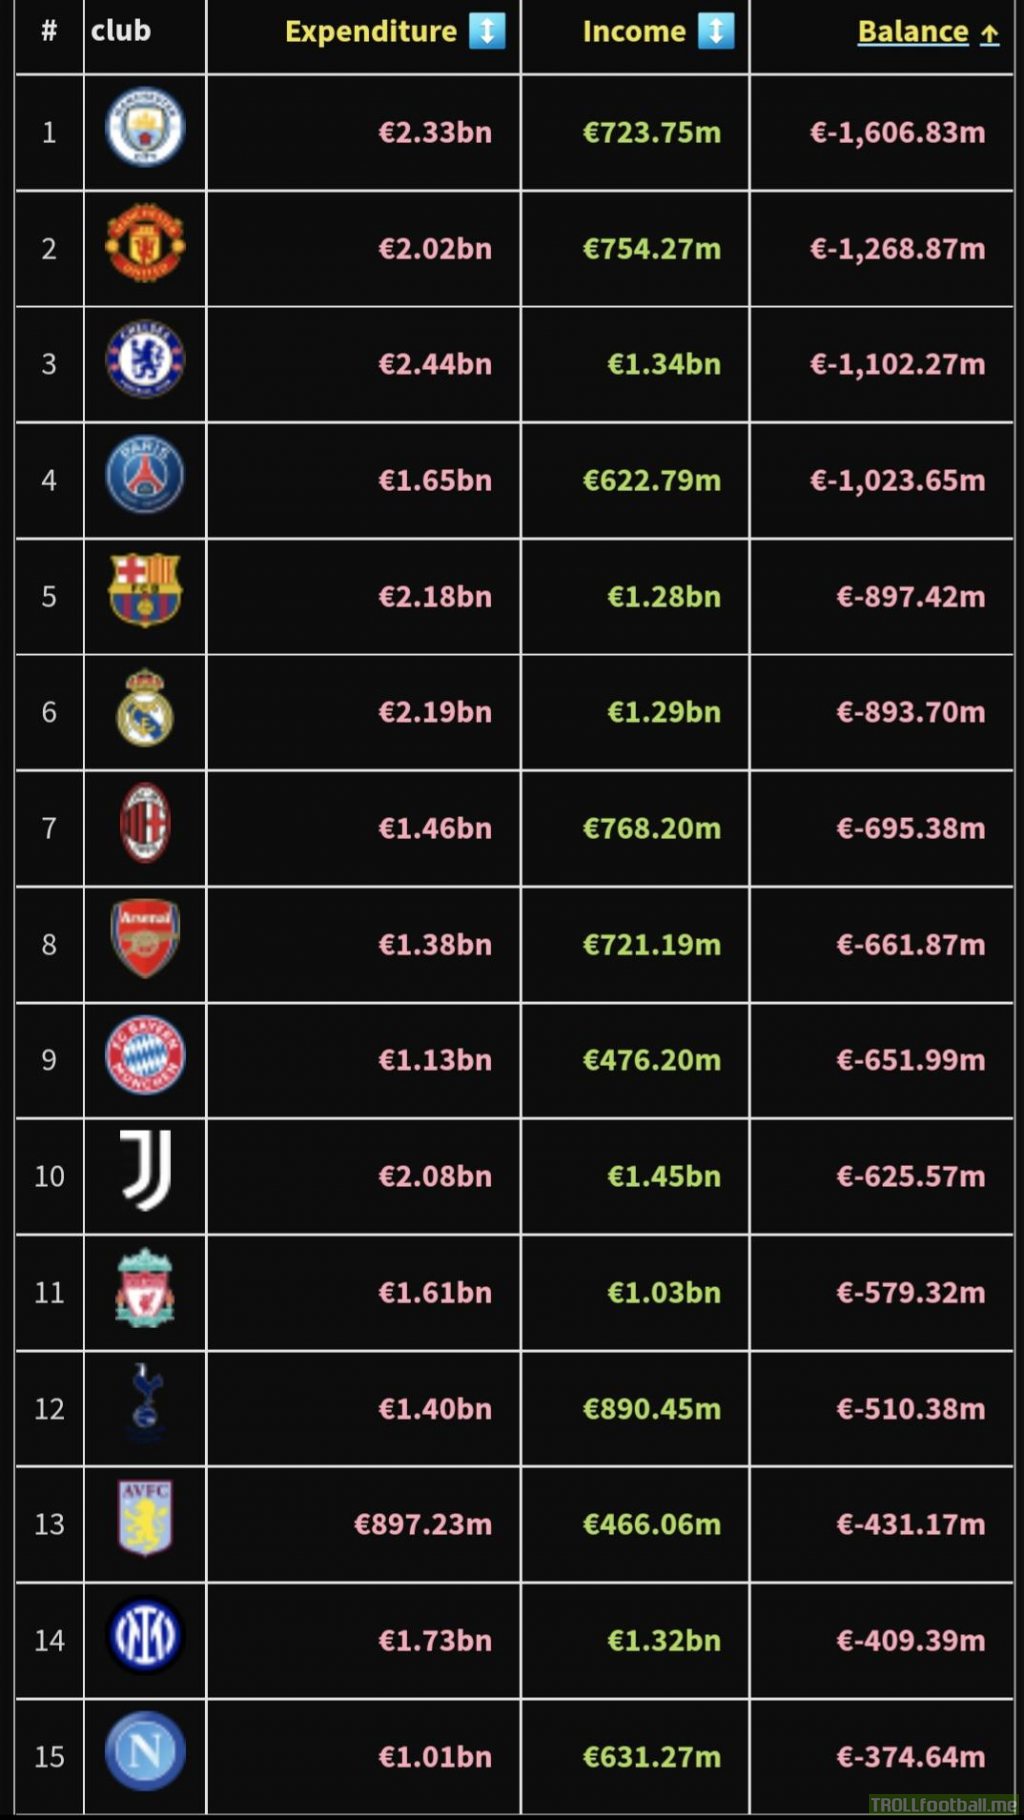 TRANSFER INCOME AND EXPENDITURE Those stats indicate which clubs spent or earned the most on transfers in the 21st century. Source: Transfermarkt